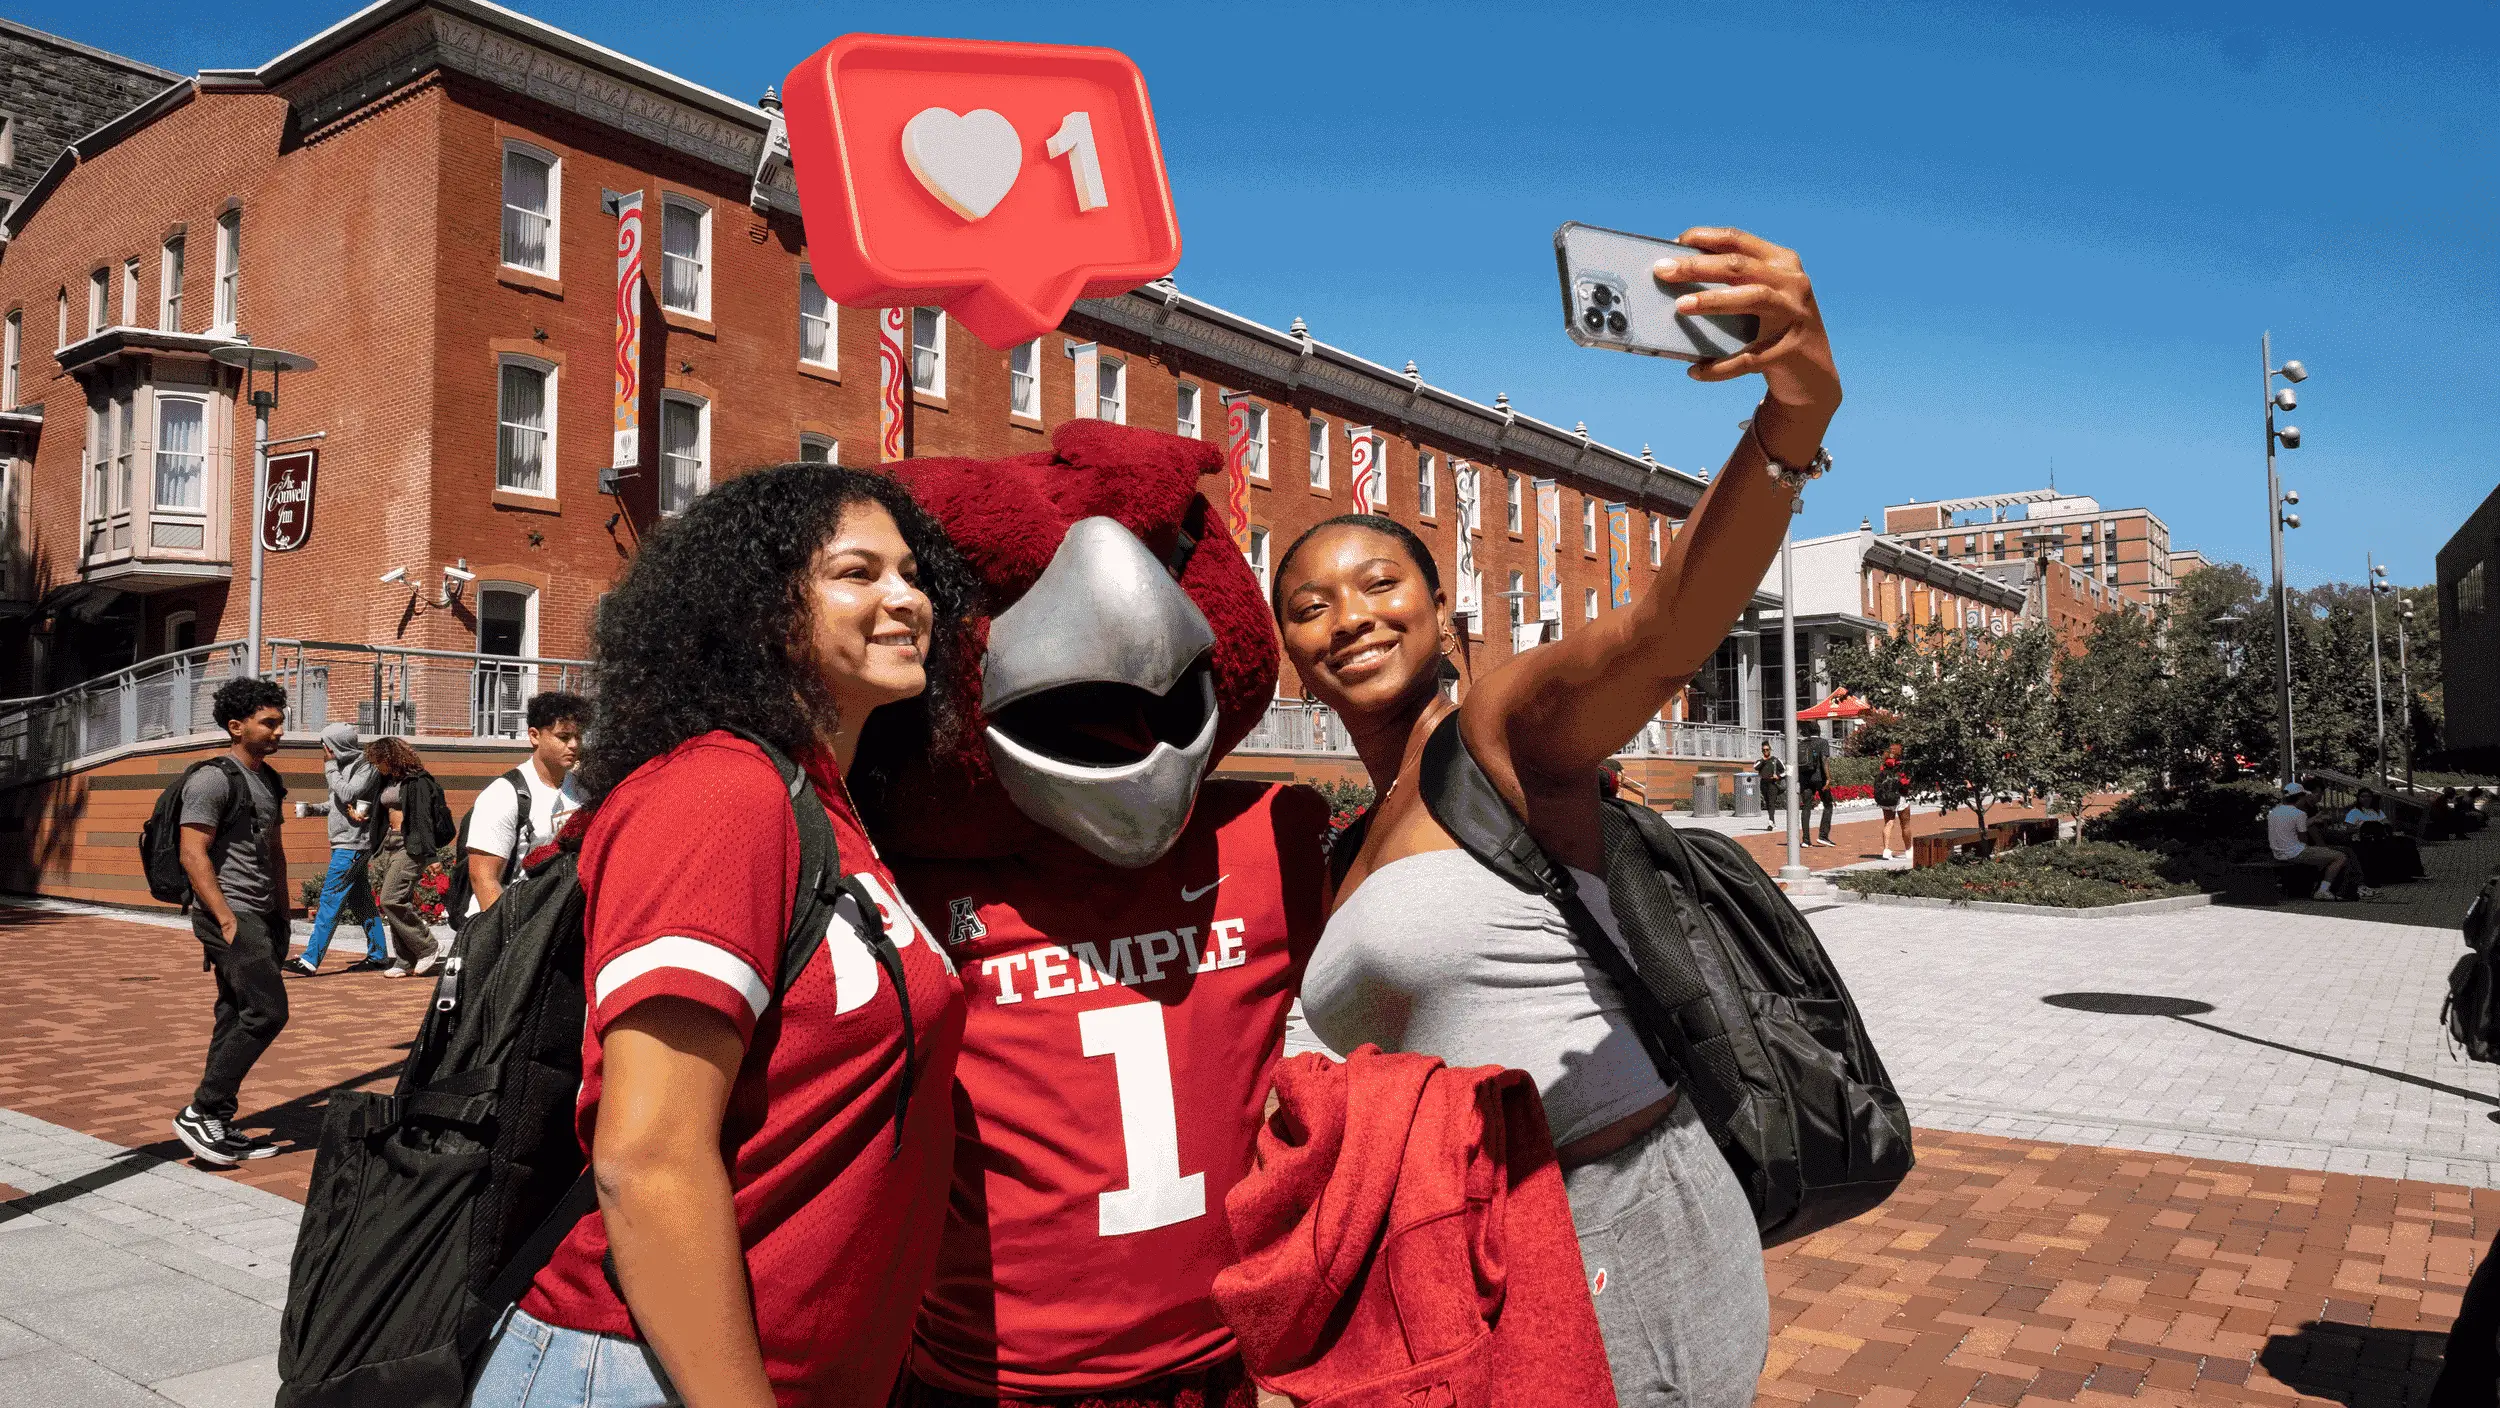 Students posing for a selfie with Hooter